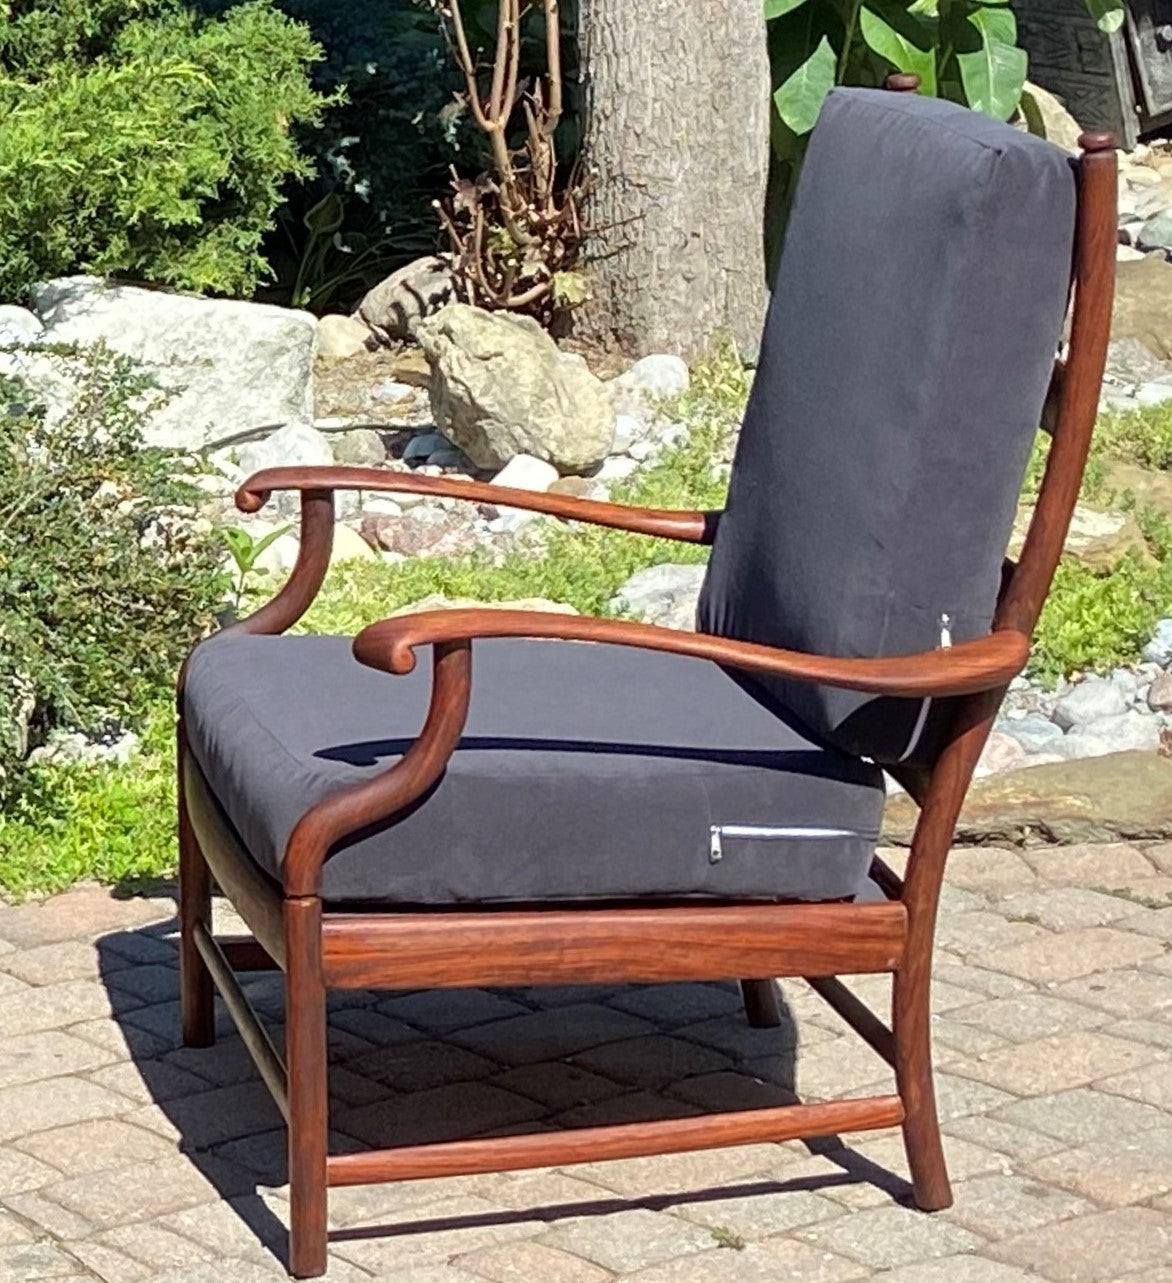 REFINISHED REUPHOLSTERED Mid Century Modern Rosewood Armchair (part of the set)